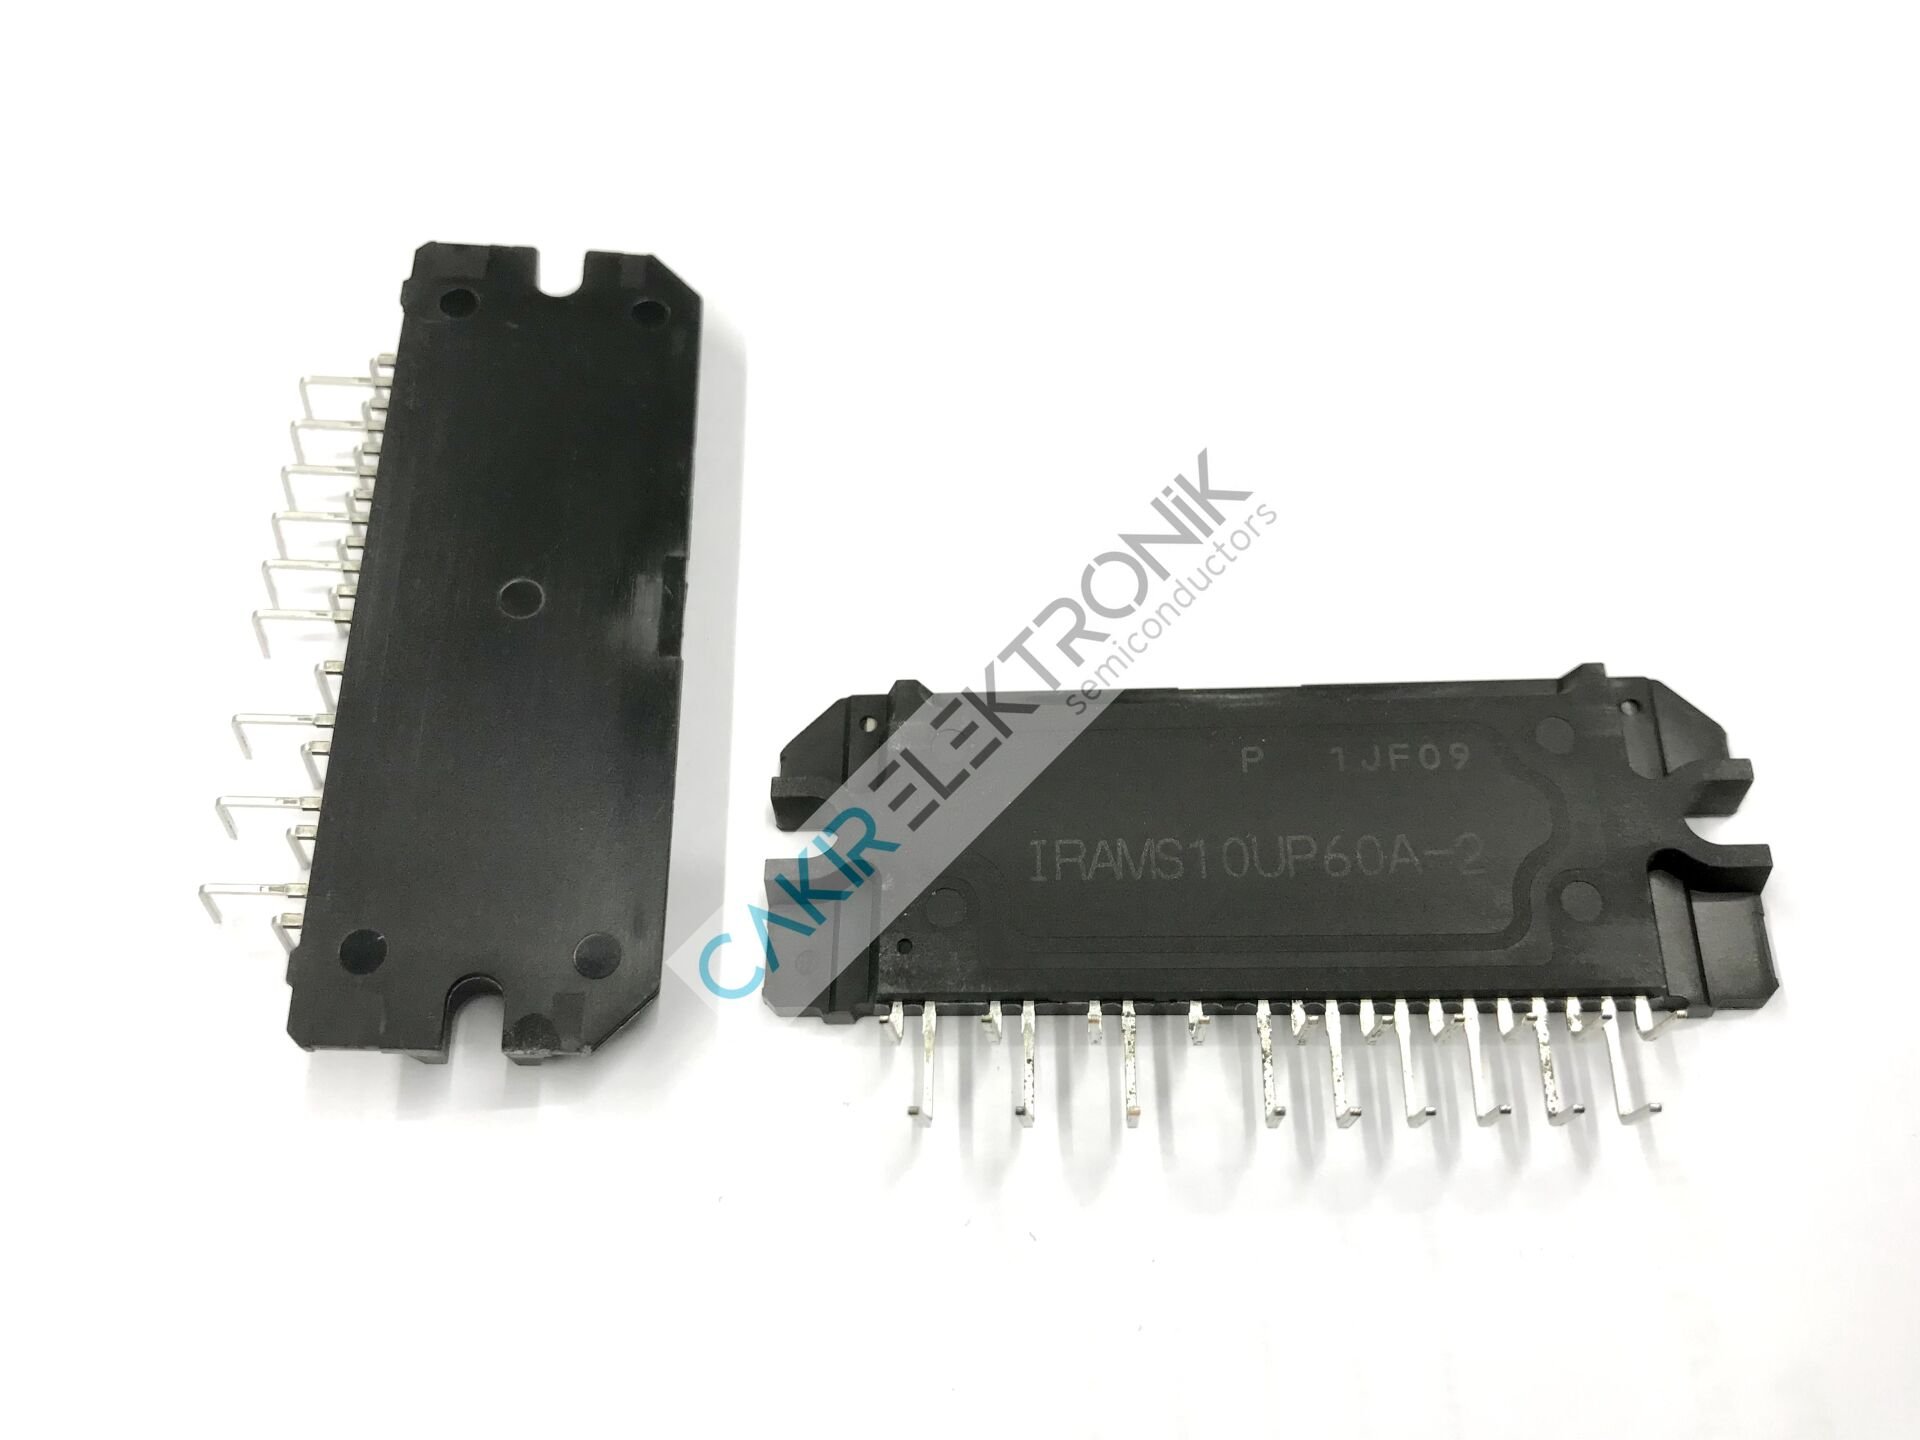 IRAMS10UP60A-2 , IRAMS10UP60 -2 , Power Driver Module IGBT 3 Phase 600 V 10 A 23-PowerSIP Module, 19 Leads, Formed Leads